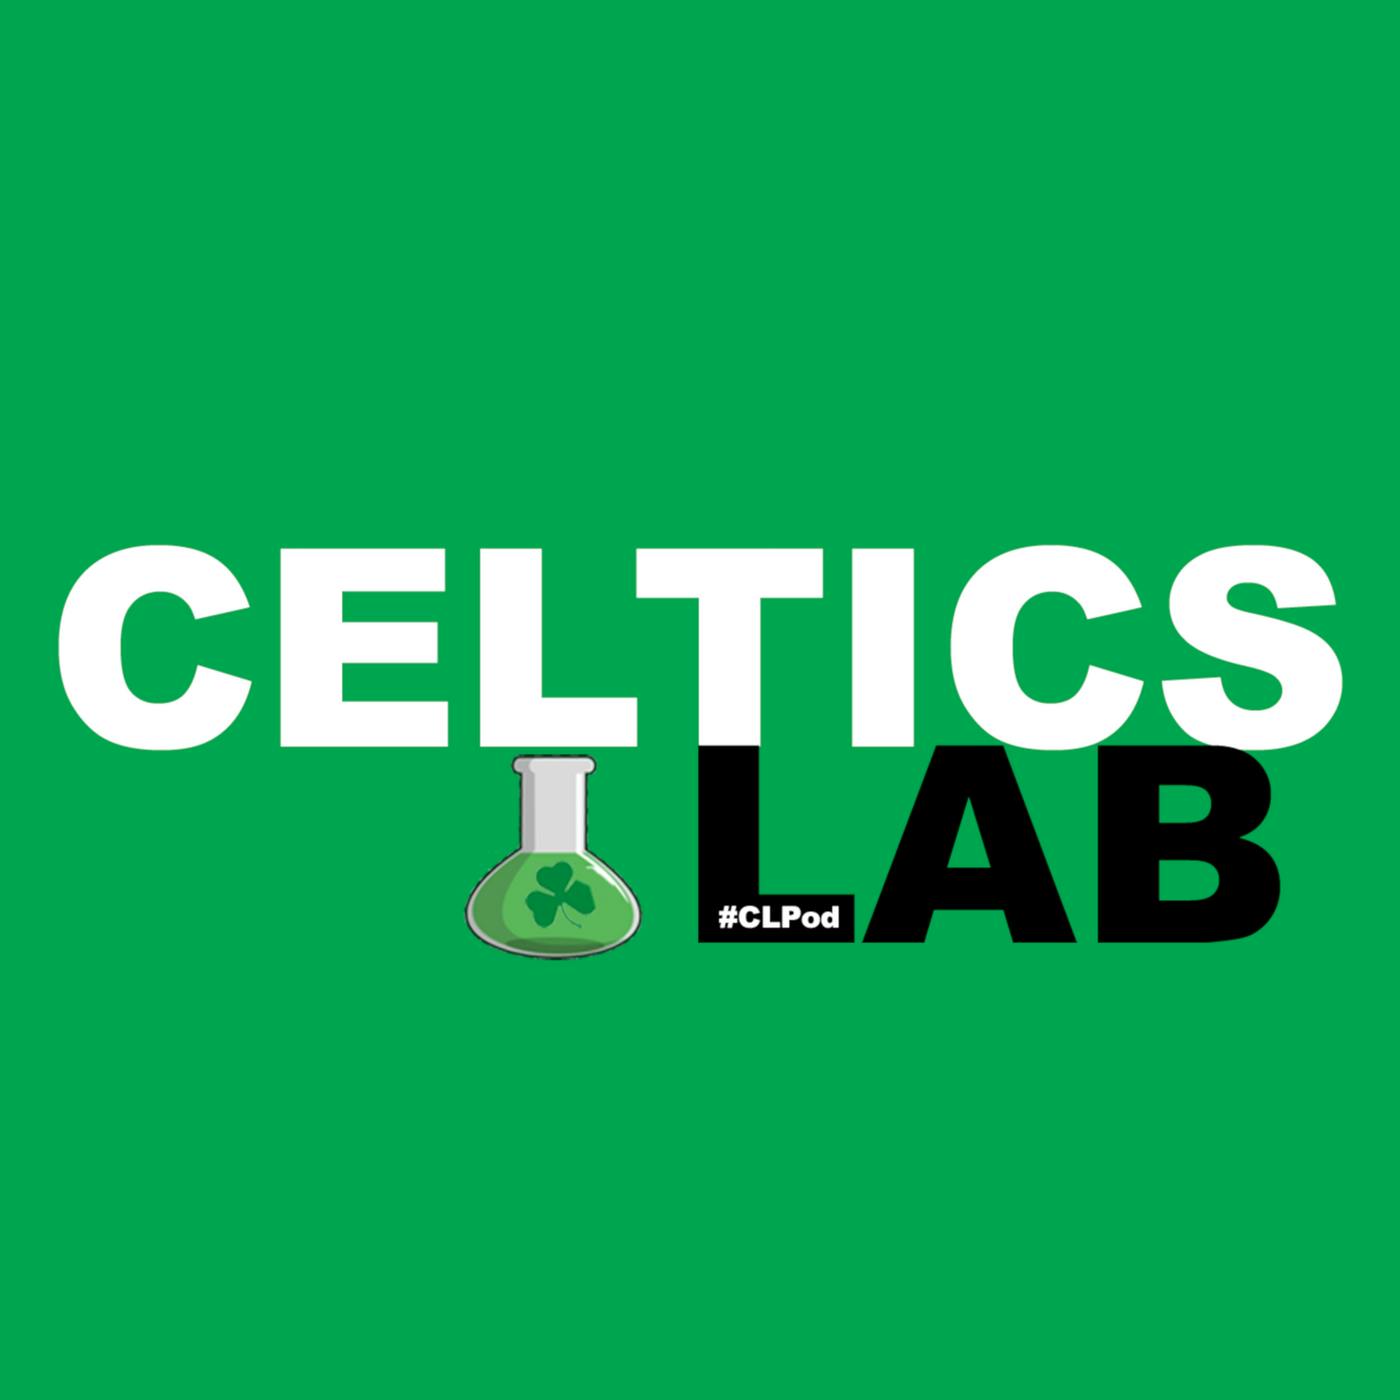 CLAB 000 - Rebooting the Celtics, the league and the podcast